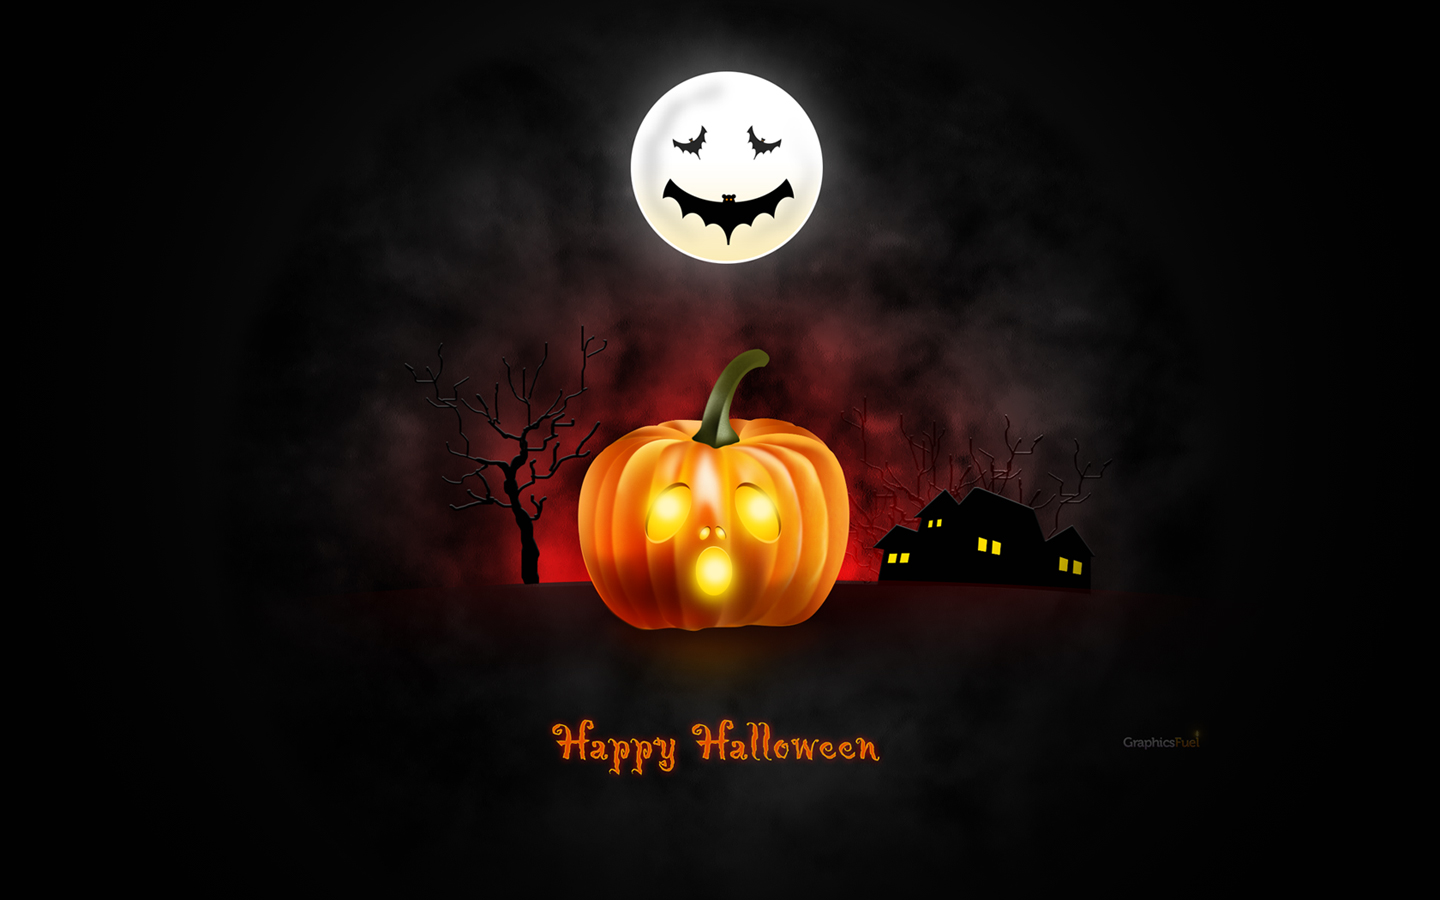 Halloween wallpaper for desktop, iPad & iPhone (PSD & icons included) -  Graphicsfuel